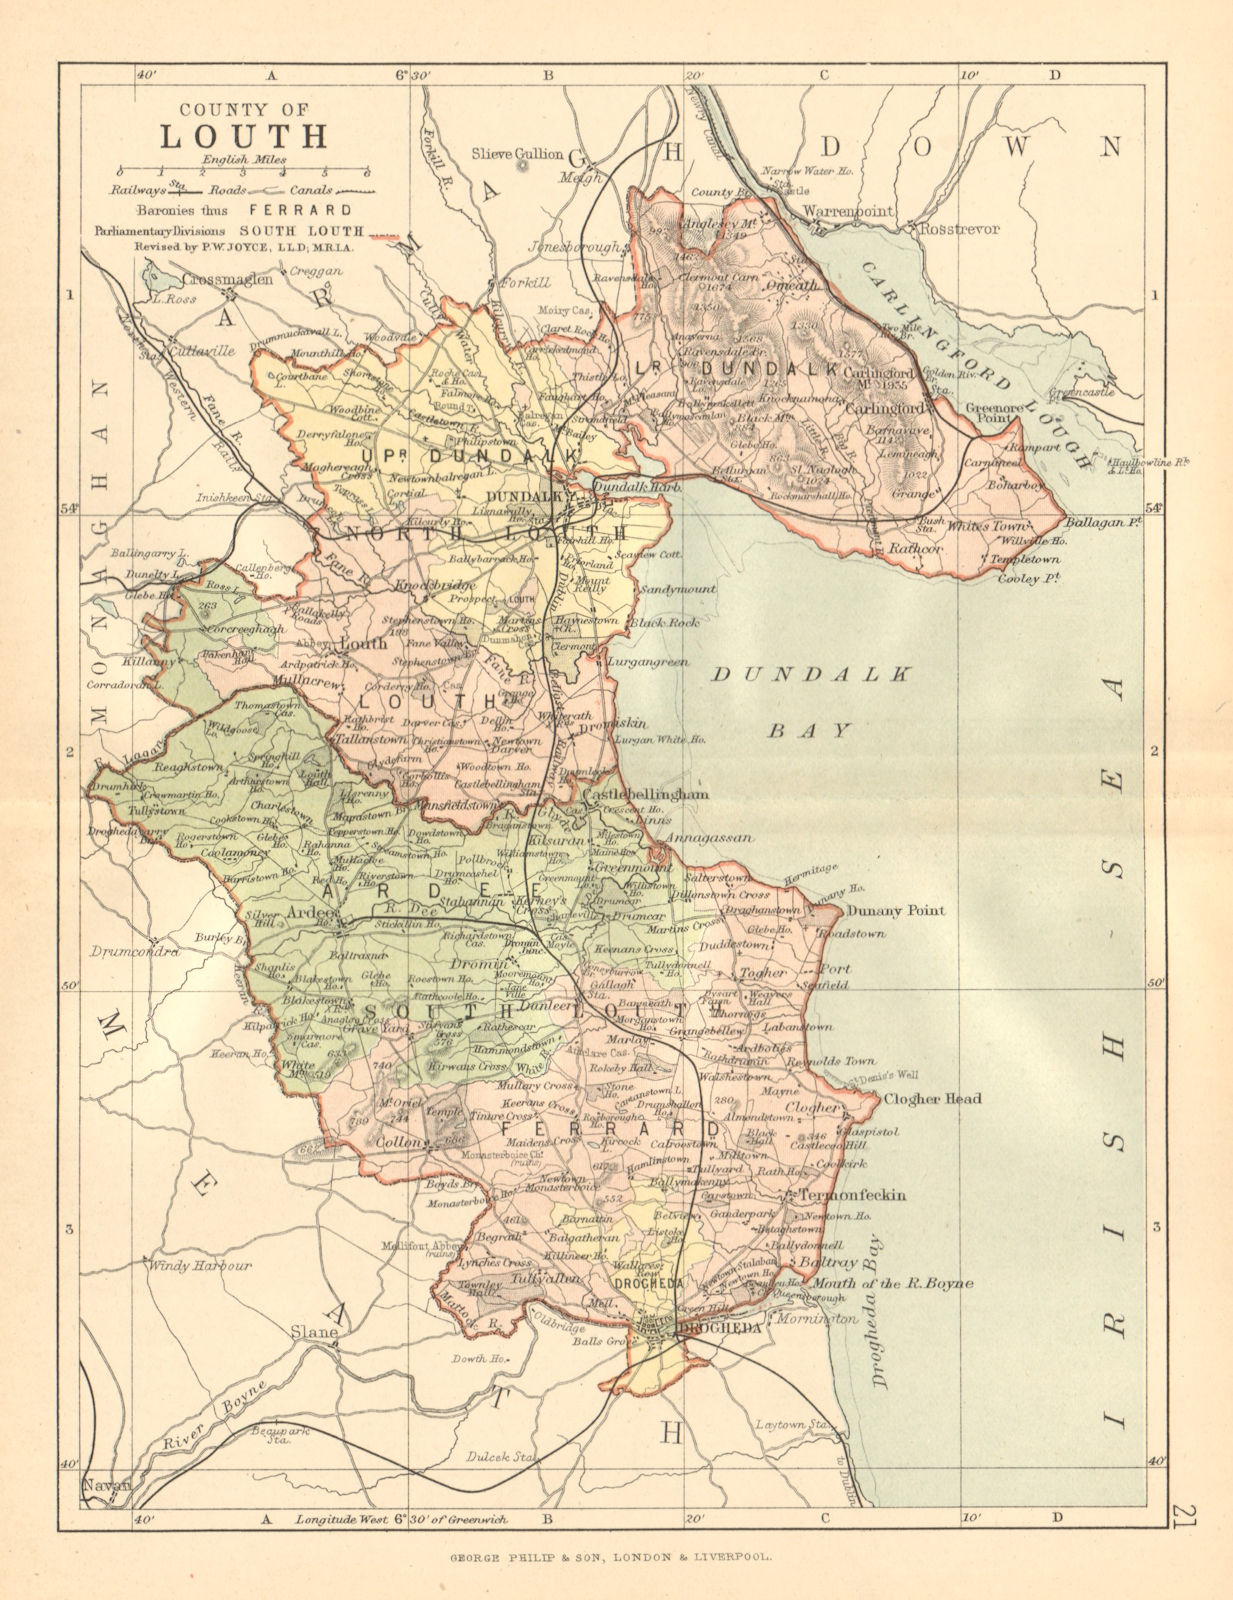 COUNTY LOUTH. Antique county map. Leinster. Ireland. BARTHOLOMEW c1902 old